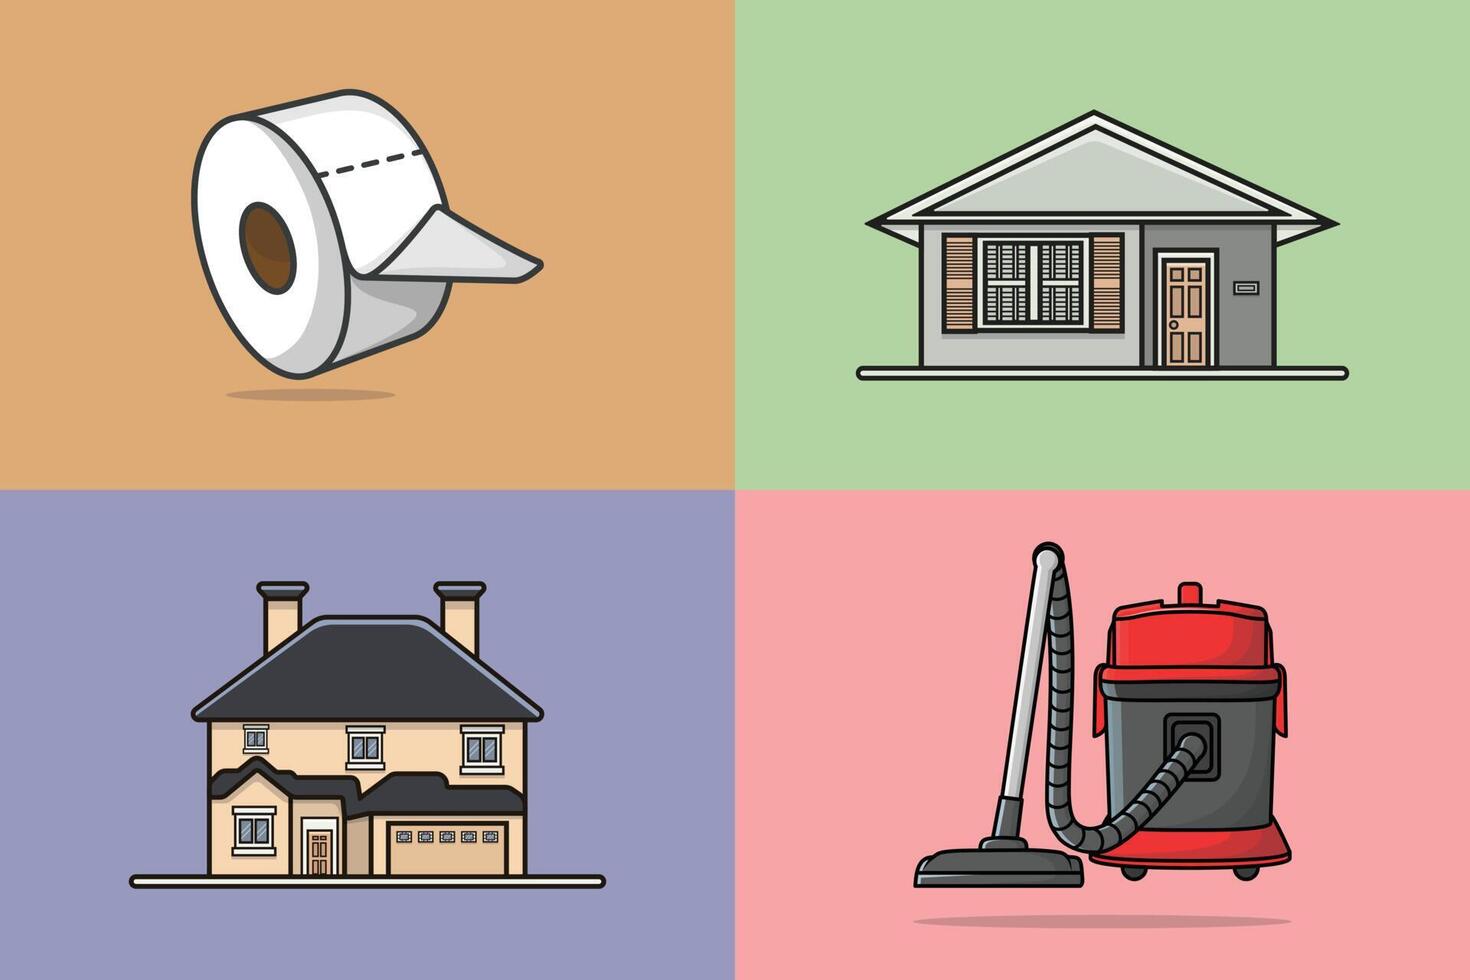 Home Interior Cleaning equipment icons collection vector illustration. Interior objects icon concept. Modern Building house, Home, Tissue and Vacuum Cleaner Machine set vector design with shadows.